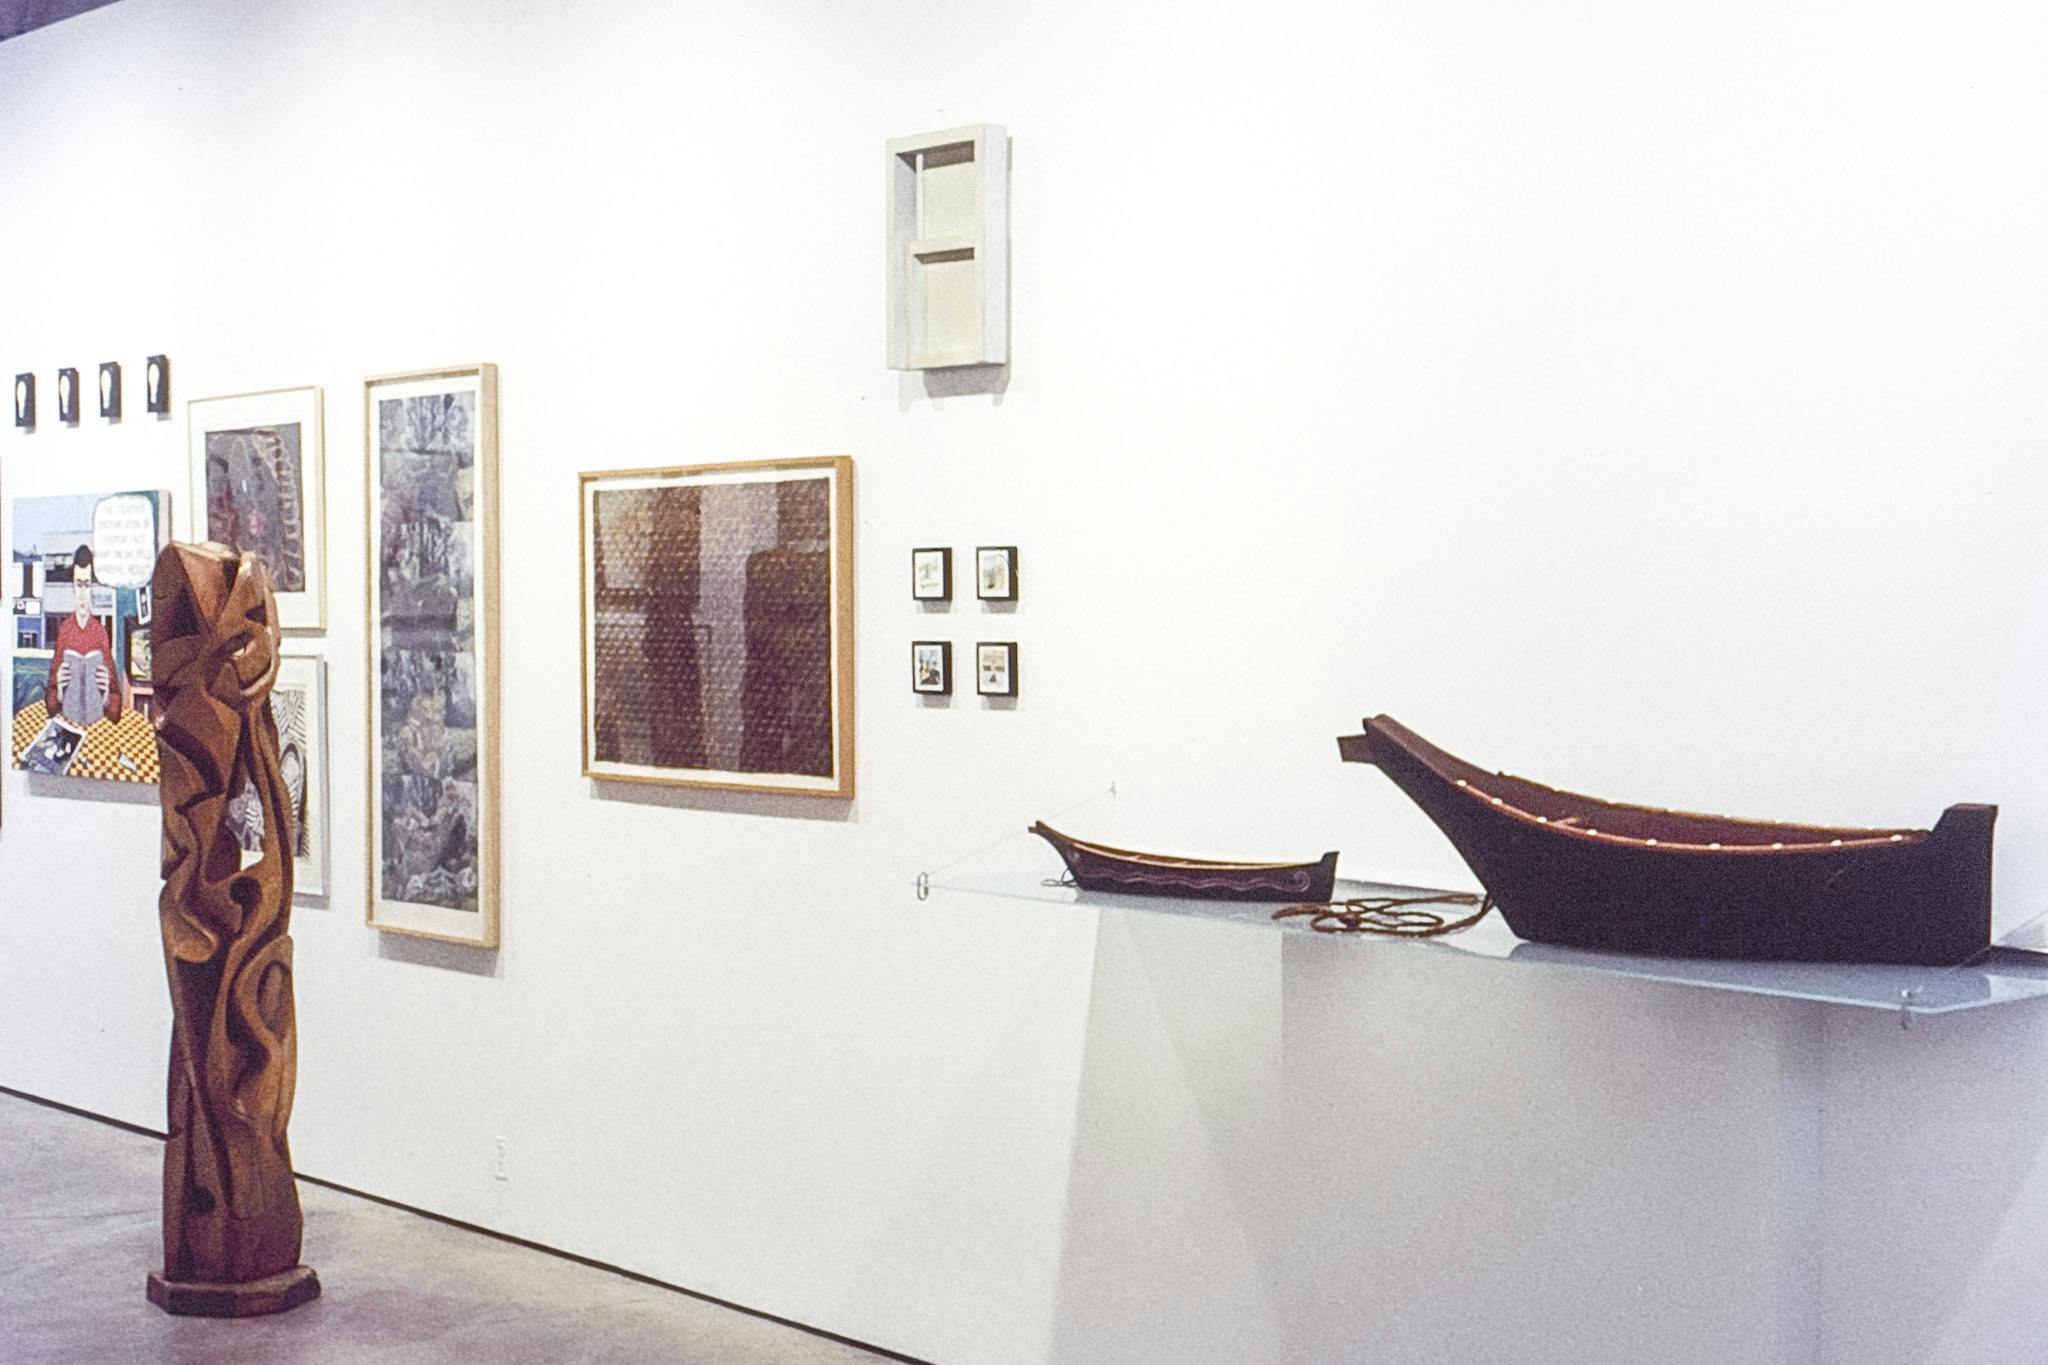 A photo of artworks installed in the gallery. A set of small-scaled two black canoes are placed closer to the camera; one is bigger than the other, and the smaller one has a snake drawn on its side. 